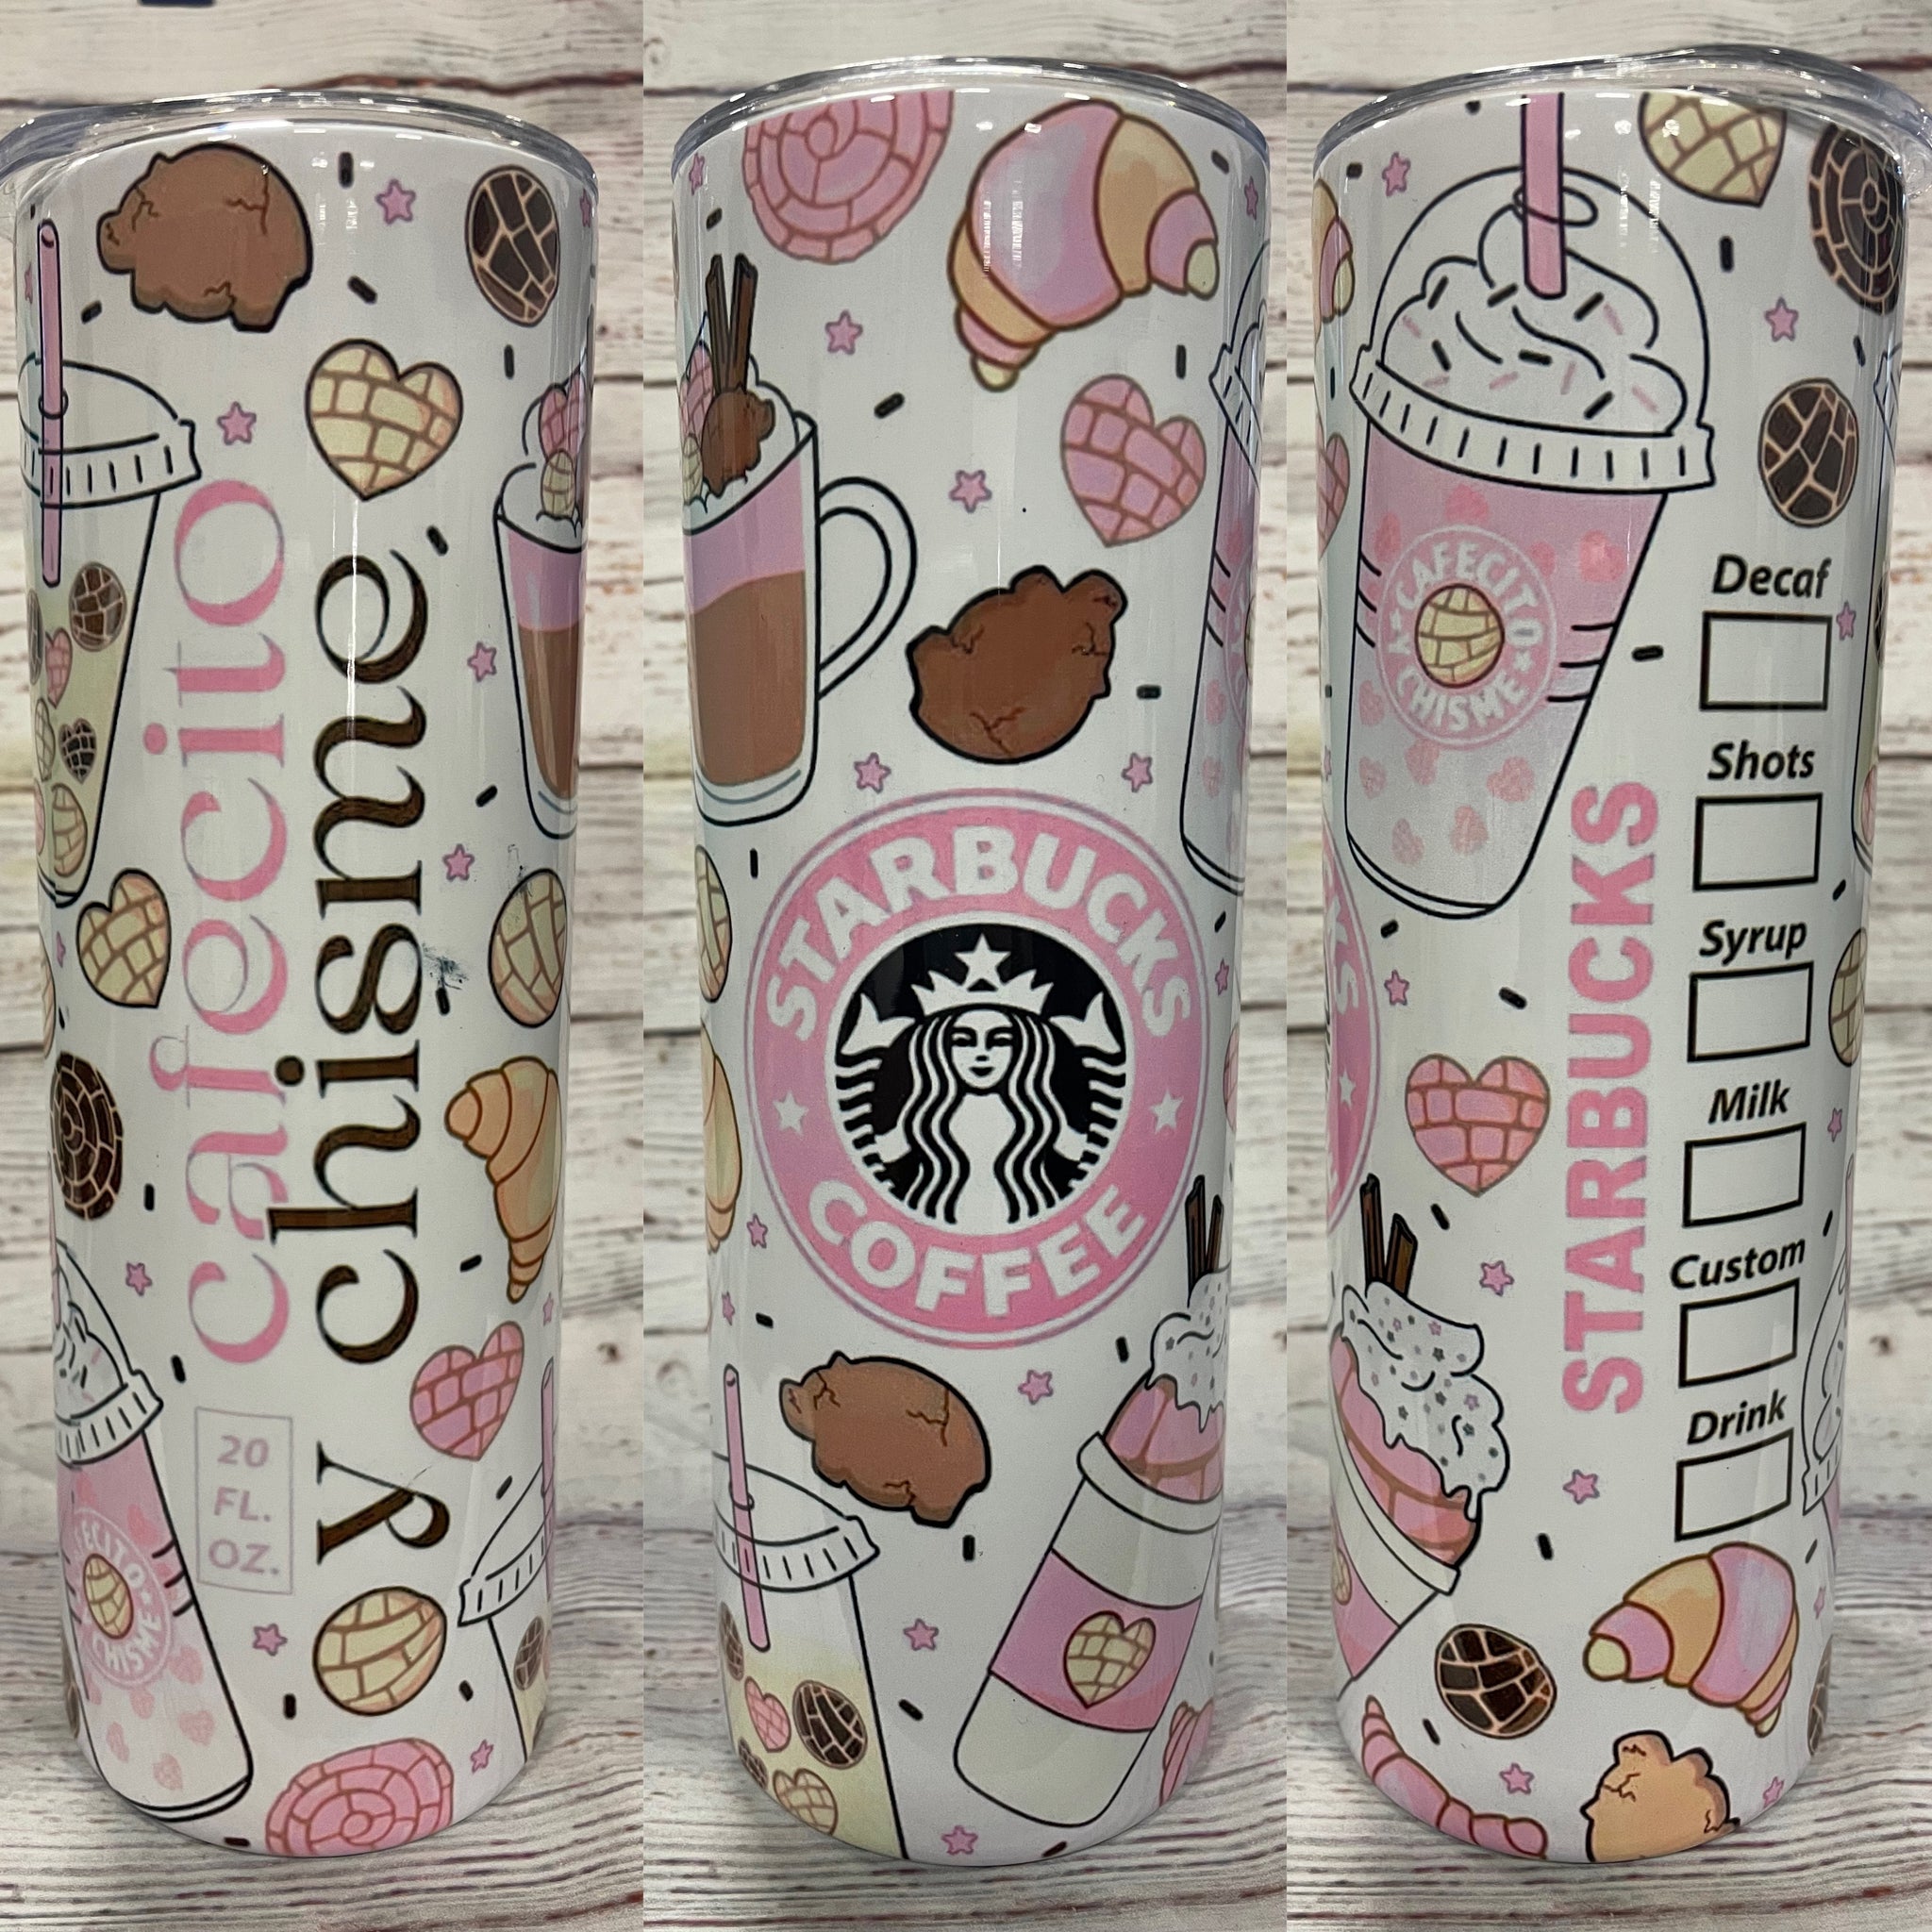 Cute Stich Cafecito Y Chisme Valentines Day Stainless Steel 20 oz Coffee  Tumbler